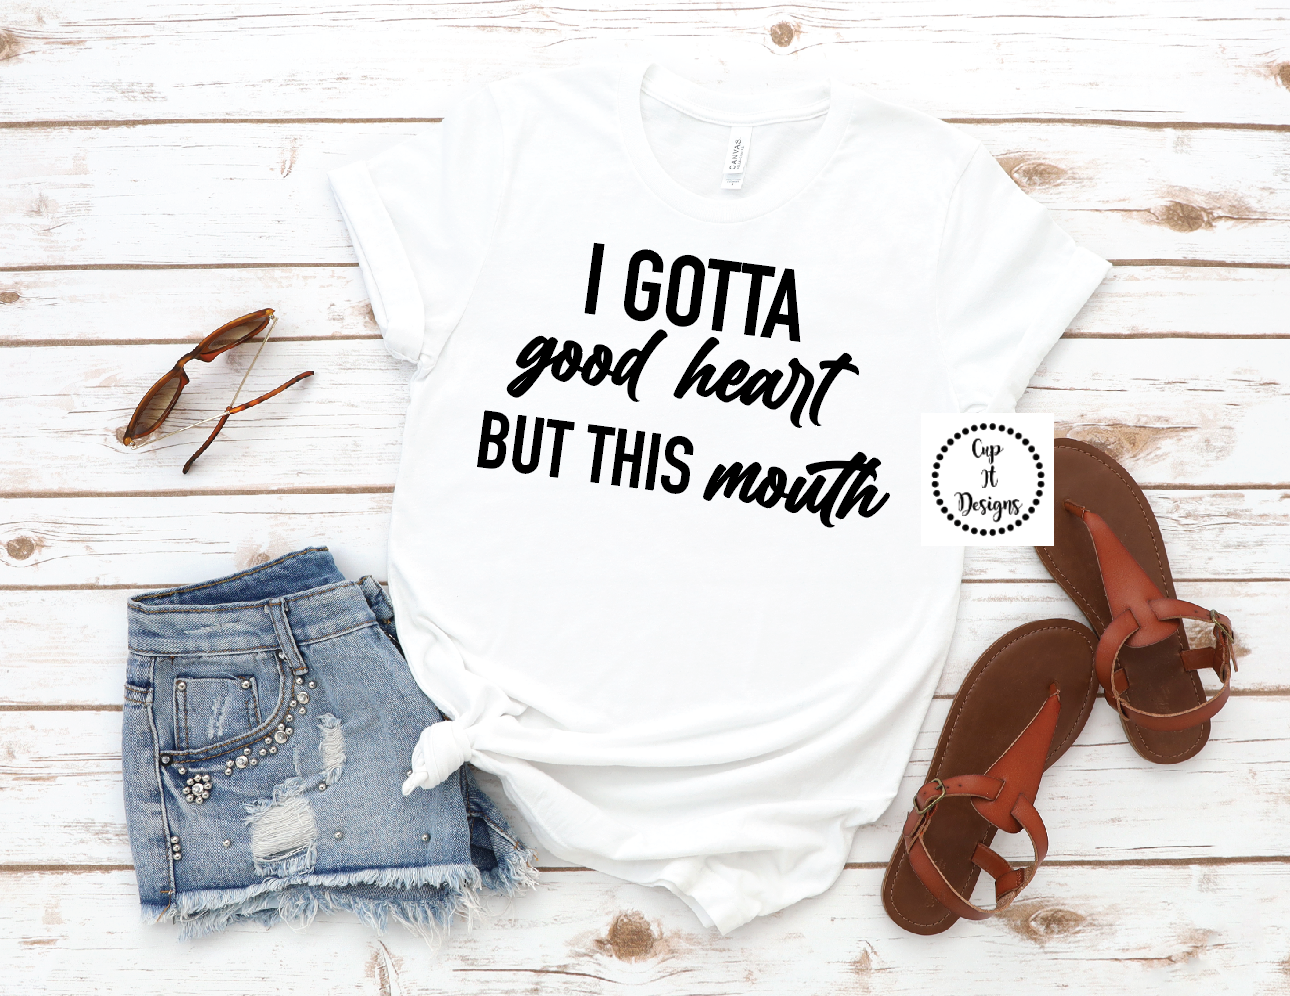 Women's "I gotta good heart but this mouth" tee